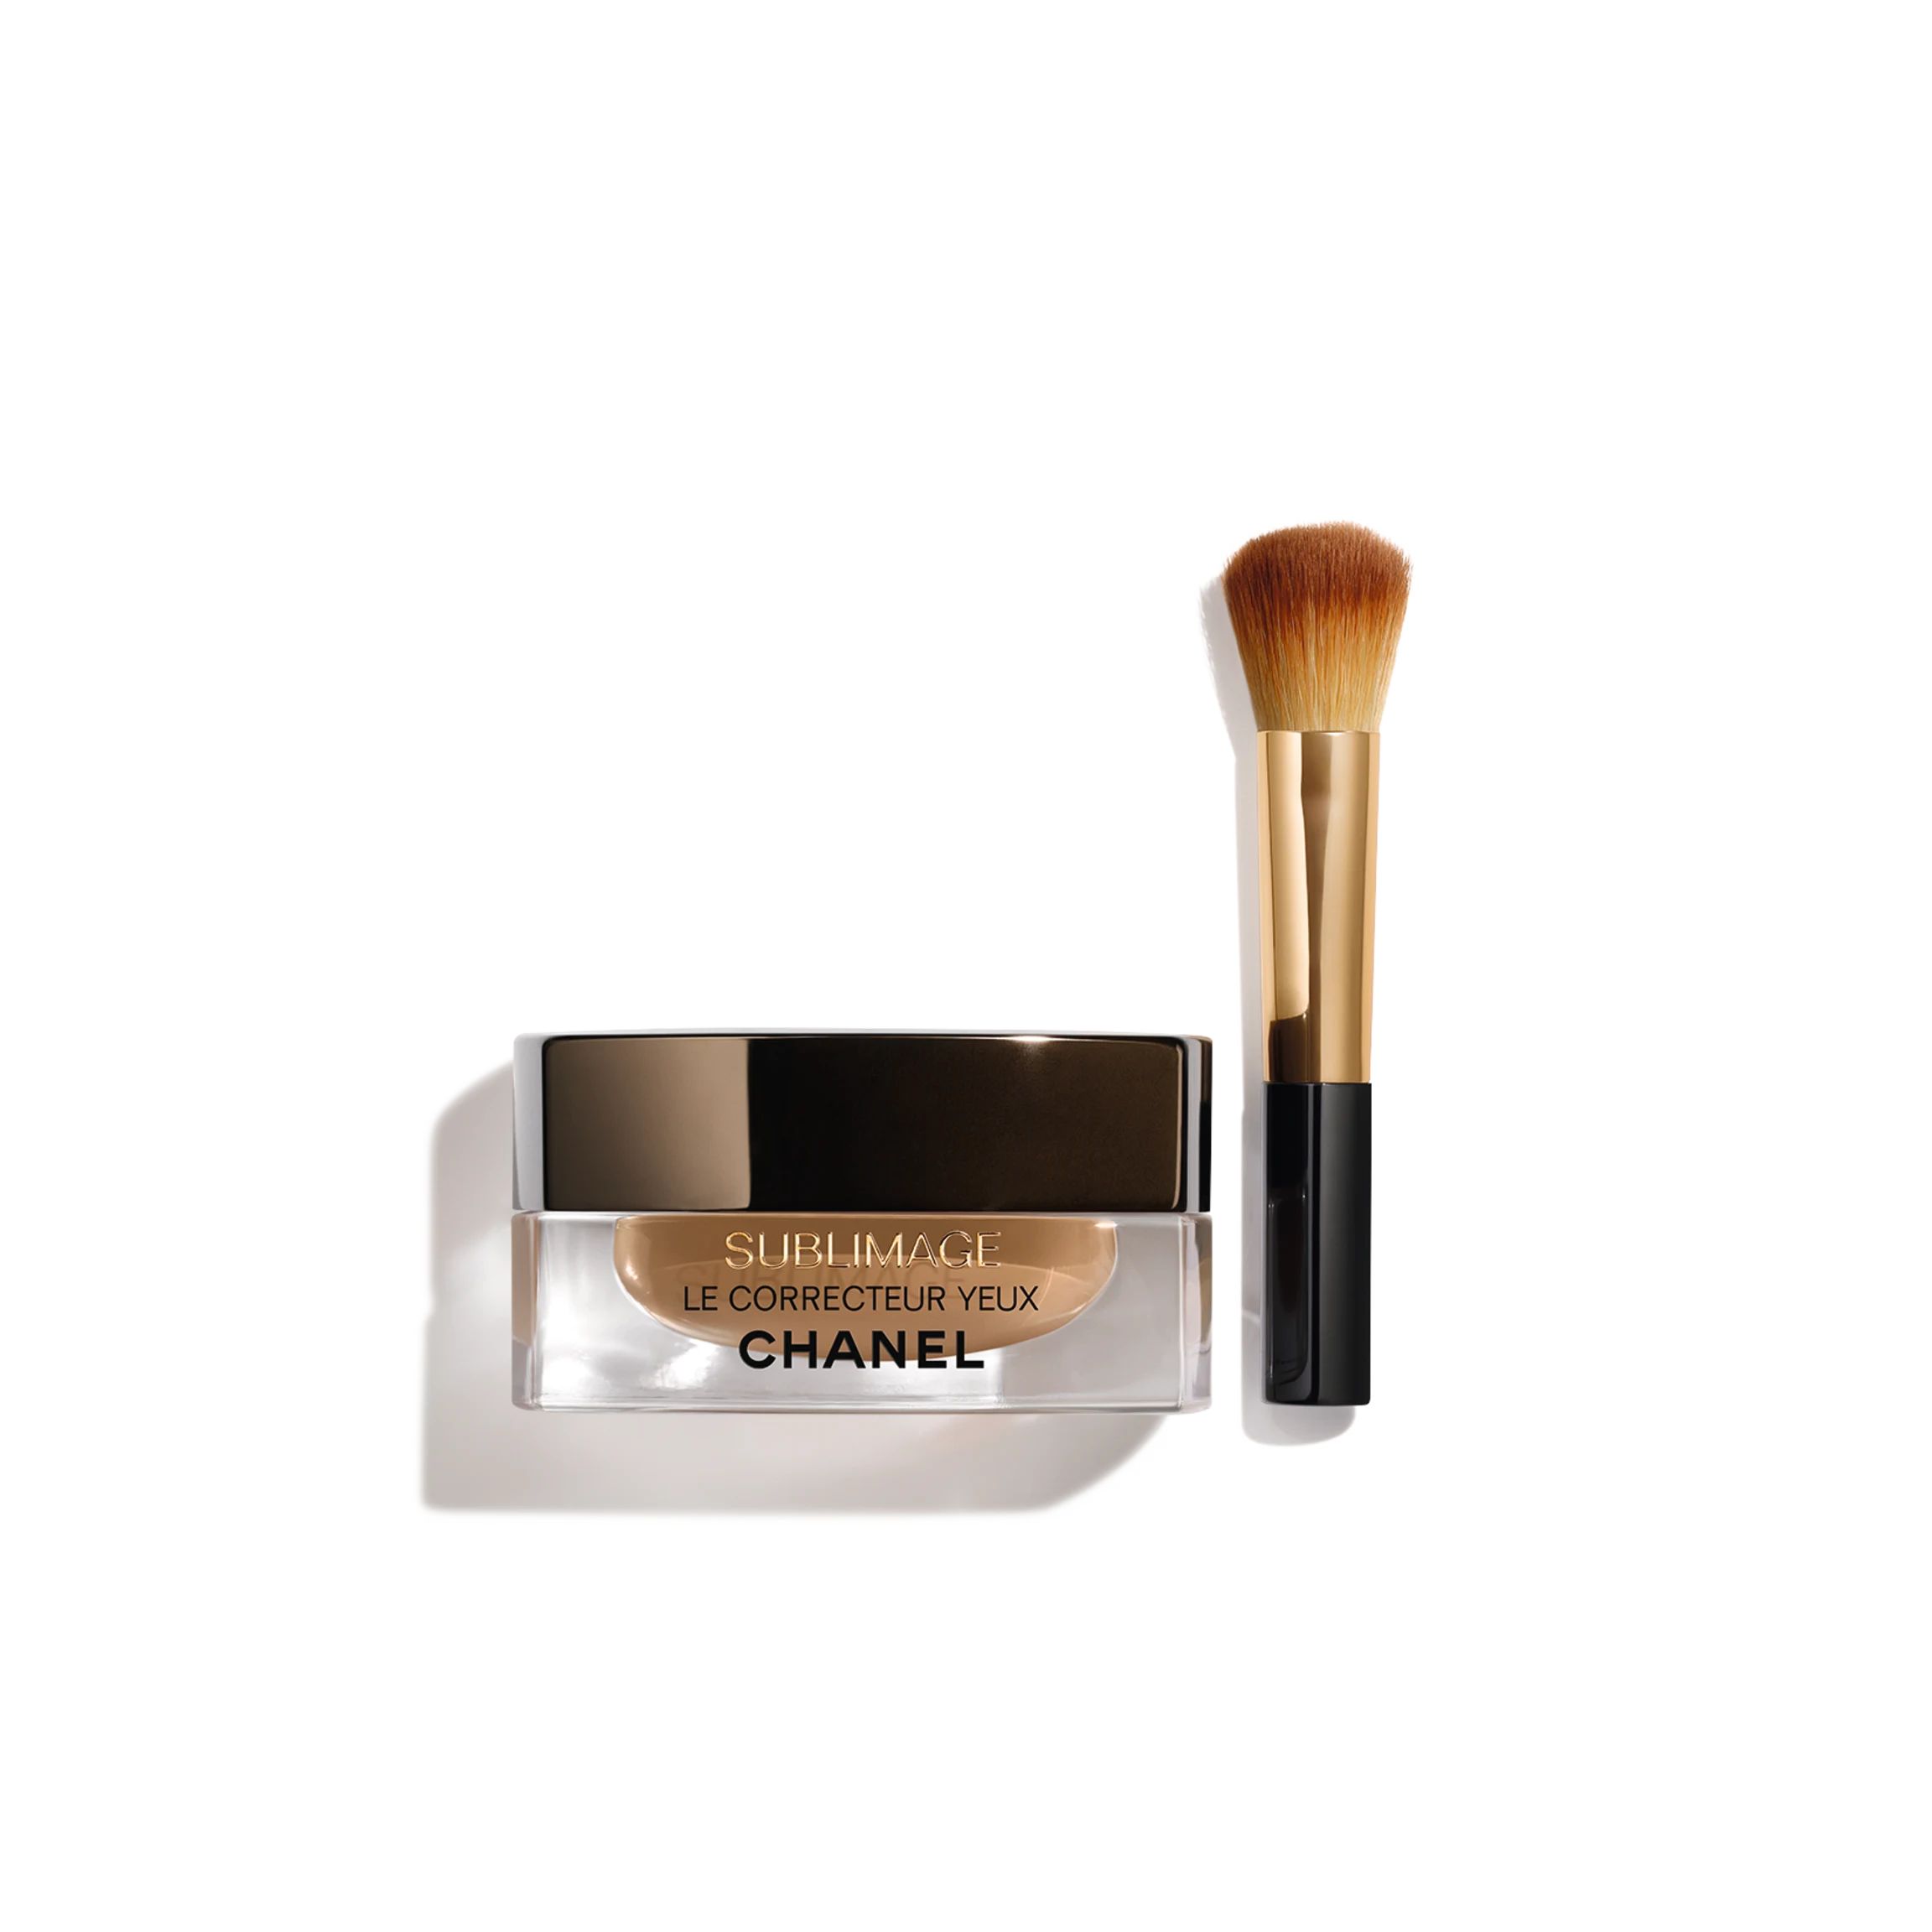 Radiance-Generating Concealing Eye Care | Chanel, Inc. (US)